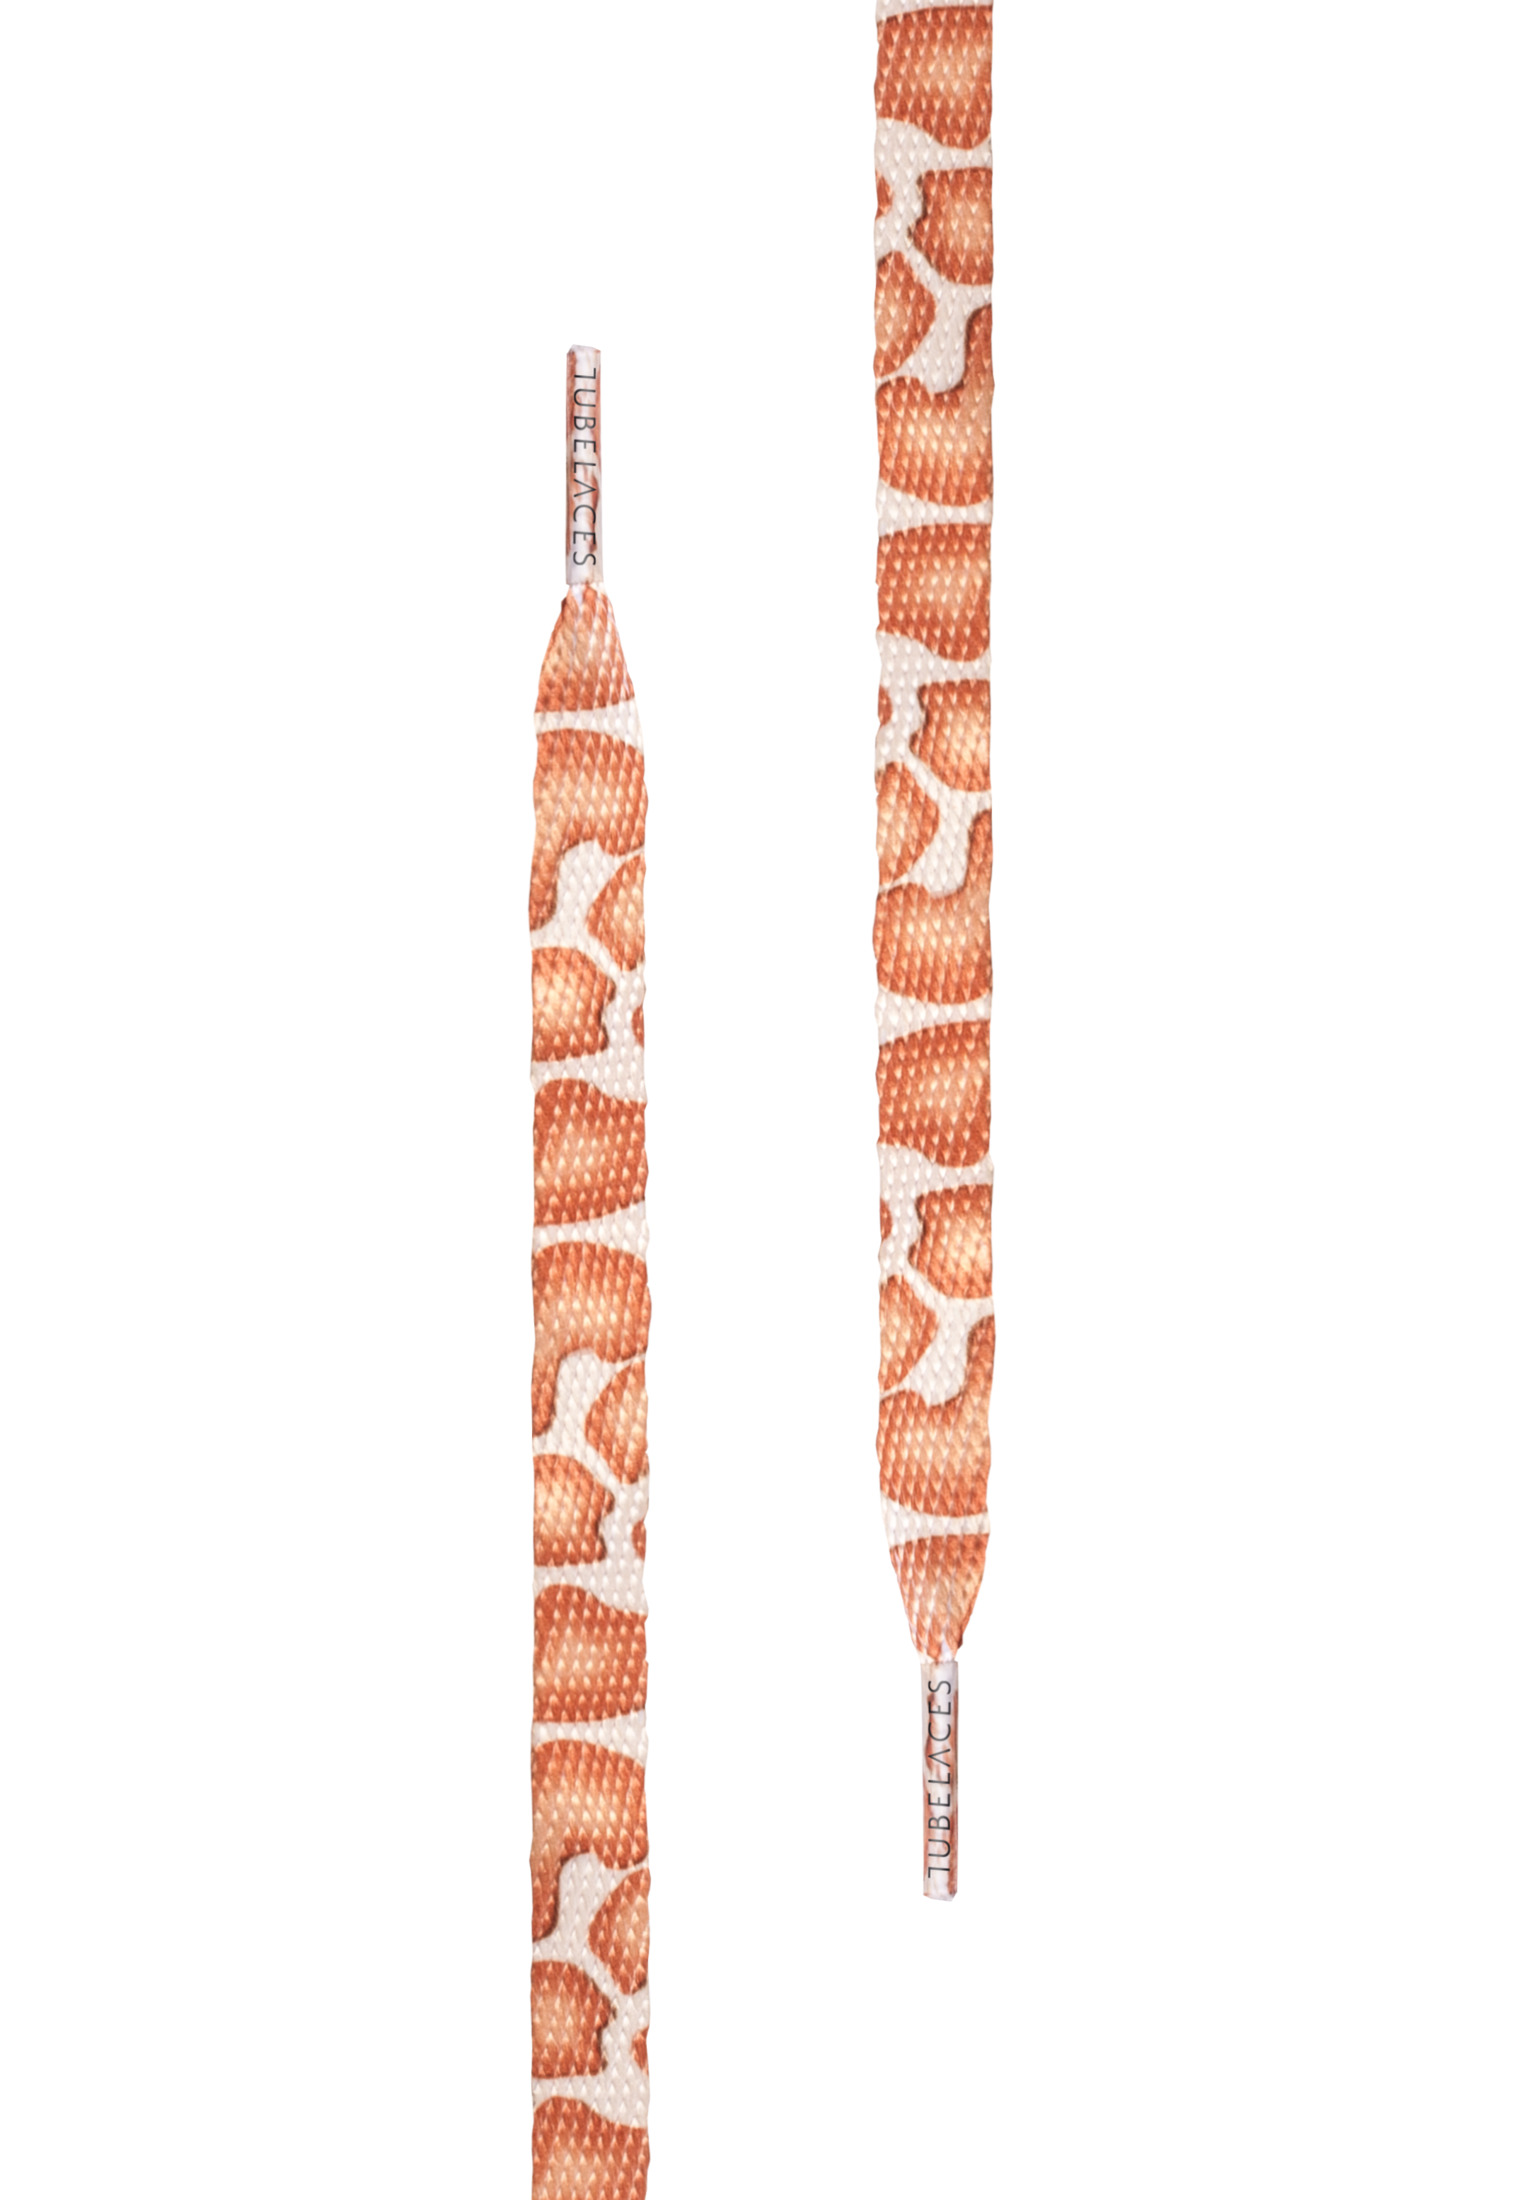 Laces Tubelaces Special Flat in Farbe Giraffe